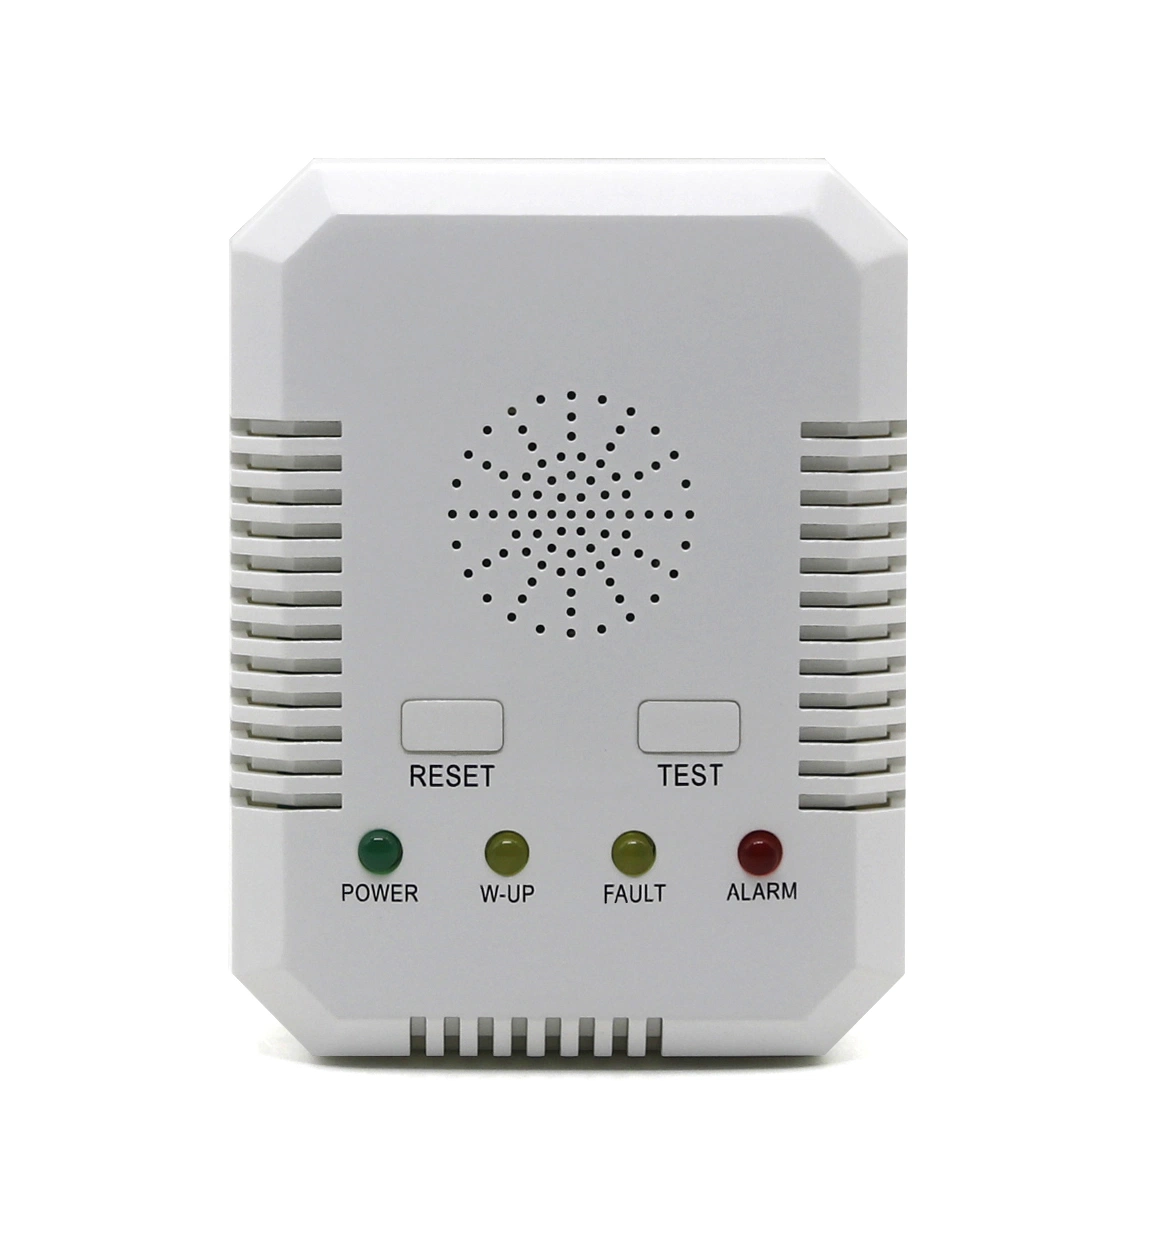 Home Security Fire Alarm Independent LPG Leak Natural Gas Detector